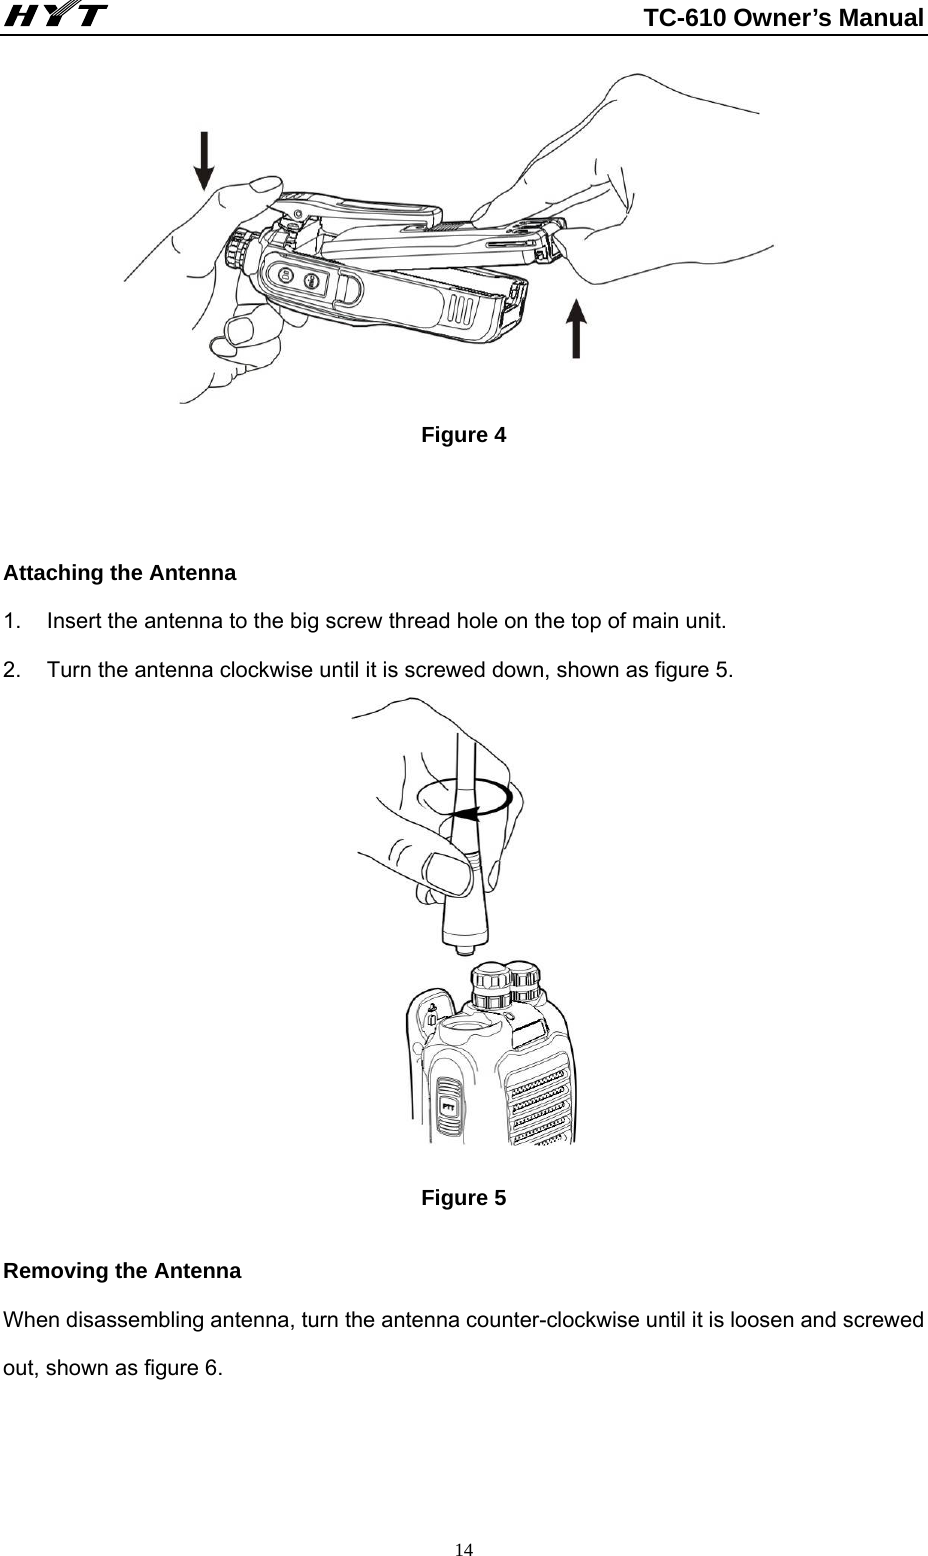                                                          TC-610 Owner’s Manual  14 Figure 4                             Attaching the Antenna 1.  Insert the antenna to the big screw thread hole on the top of main unit.     2.  Turn the antenna clockwise until it is screwed down, shown as figure 5.                  Figure 5                                                  Removing the Antenna   When disassembling antenna, turn the antenna counter-clockwise until it is loosen and screwed out, shown as figure 6.   